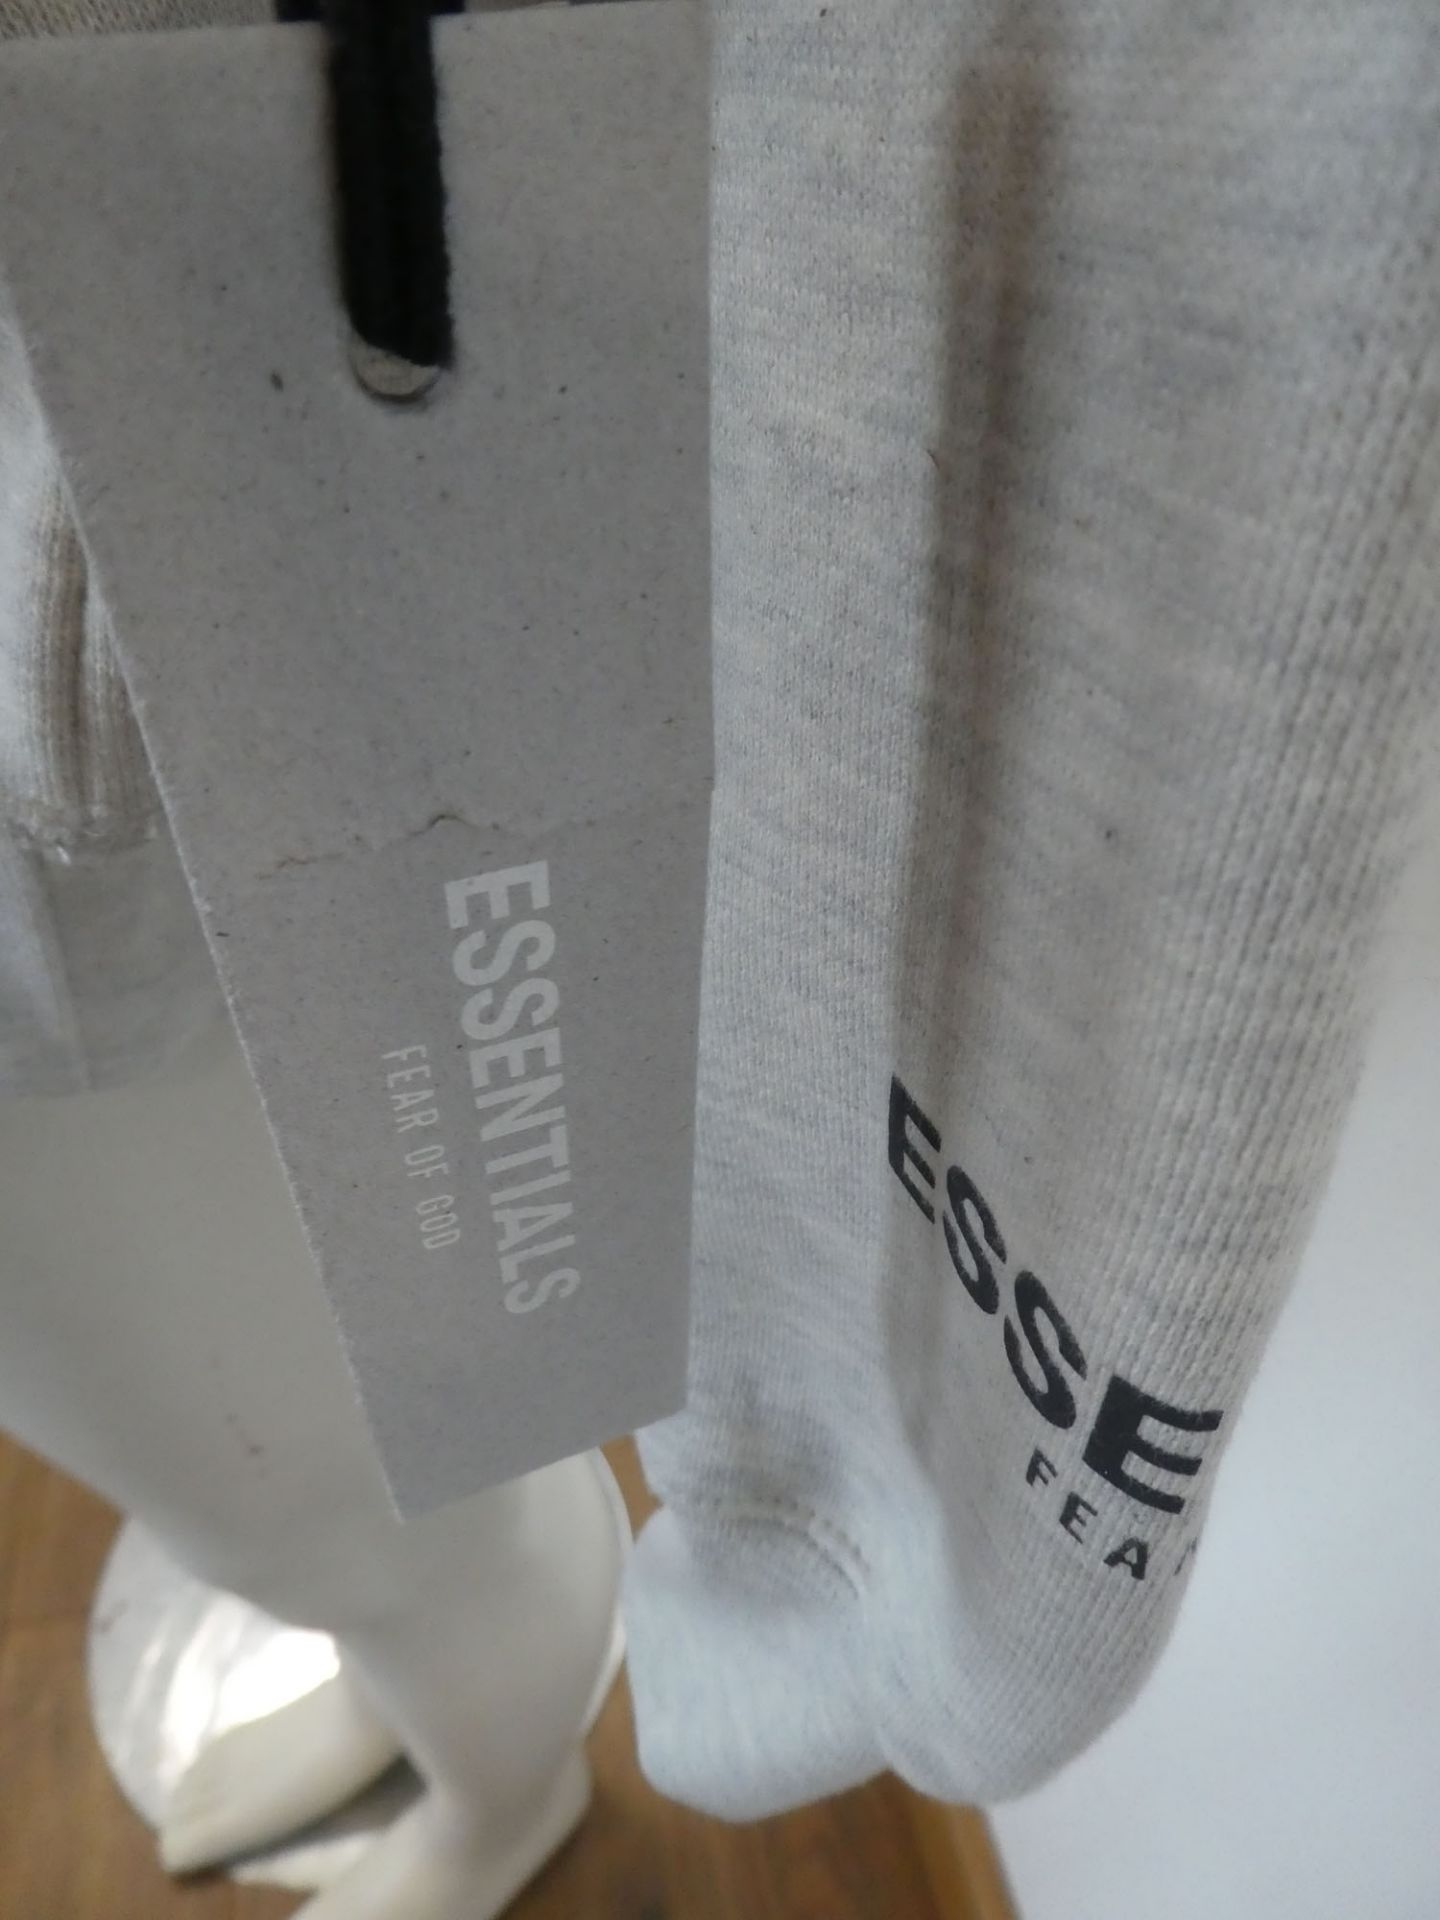 Essentials Fear of God hoodie in light grey size S - Image 4 of 5